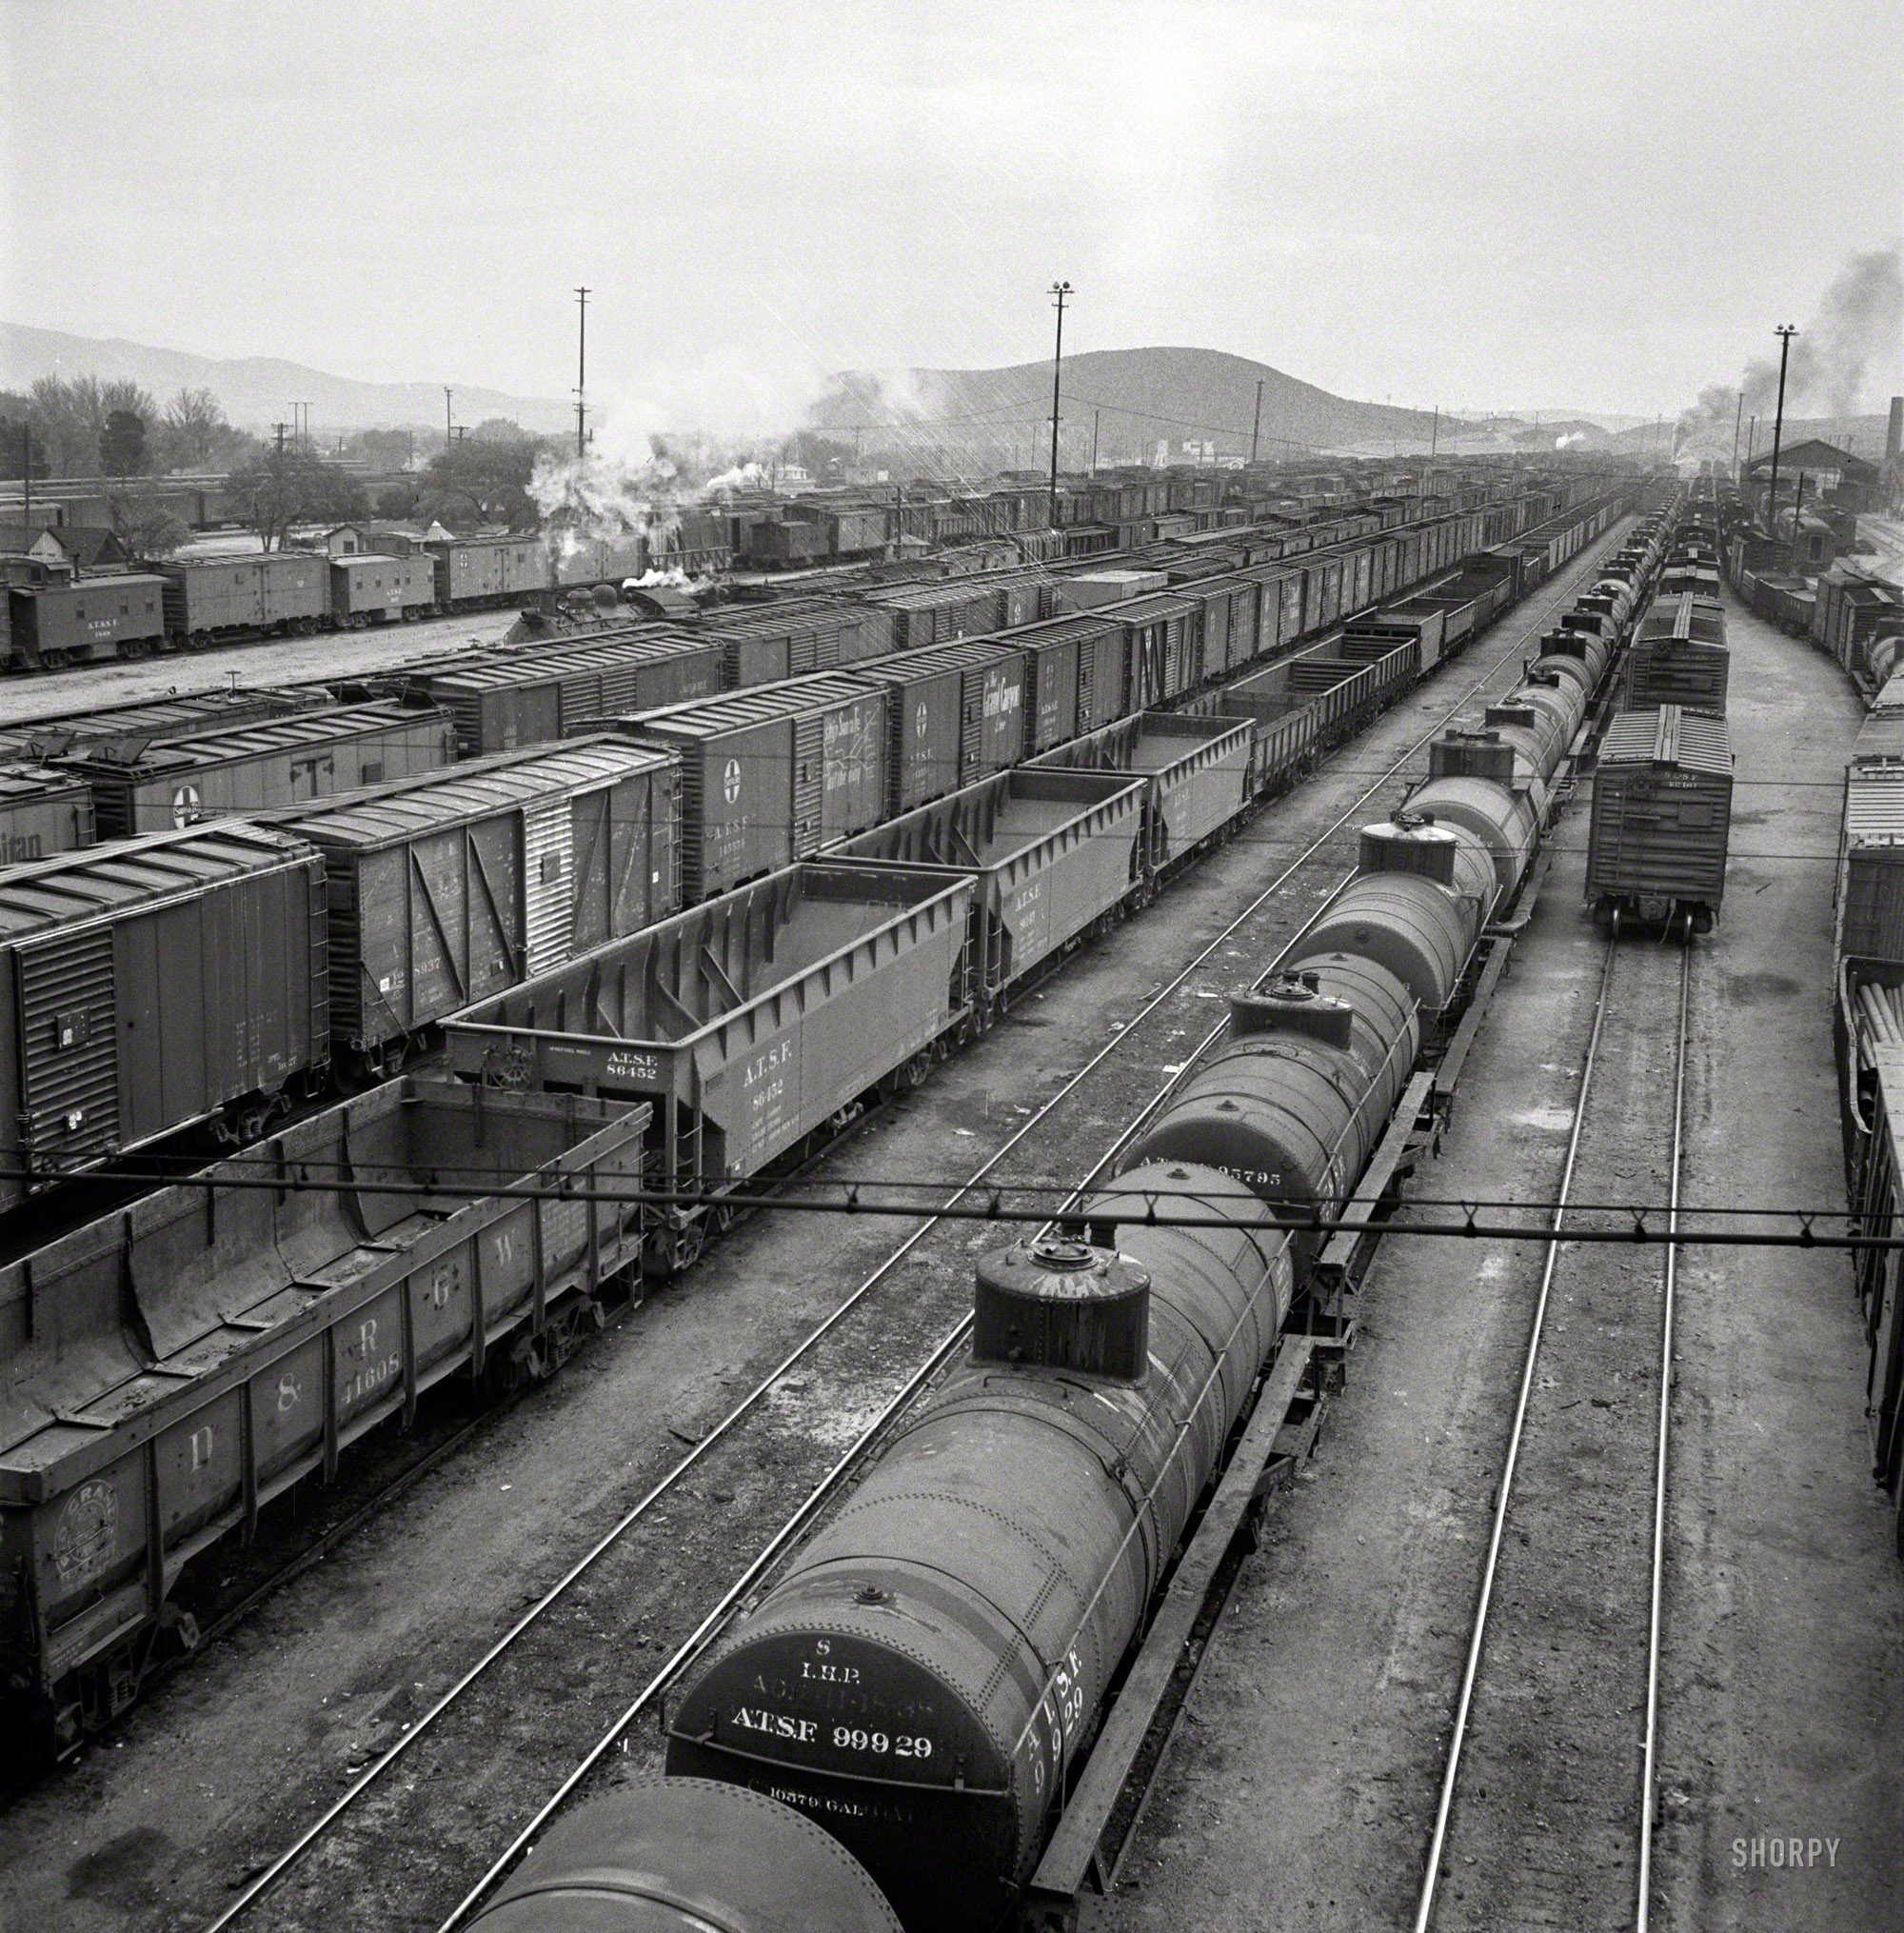 March 1943. "Barstow, California. General view of the Atchison, Topeka & Santa Fe yard." Photo by Jack Delano, Office of War Information. View full size.